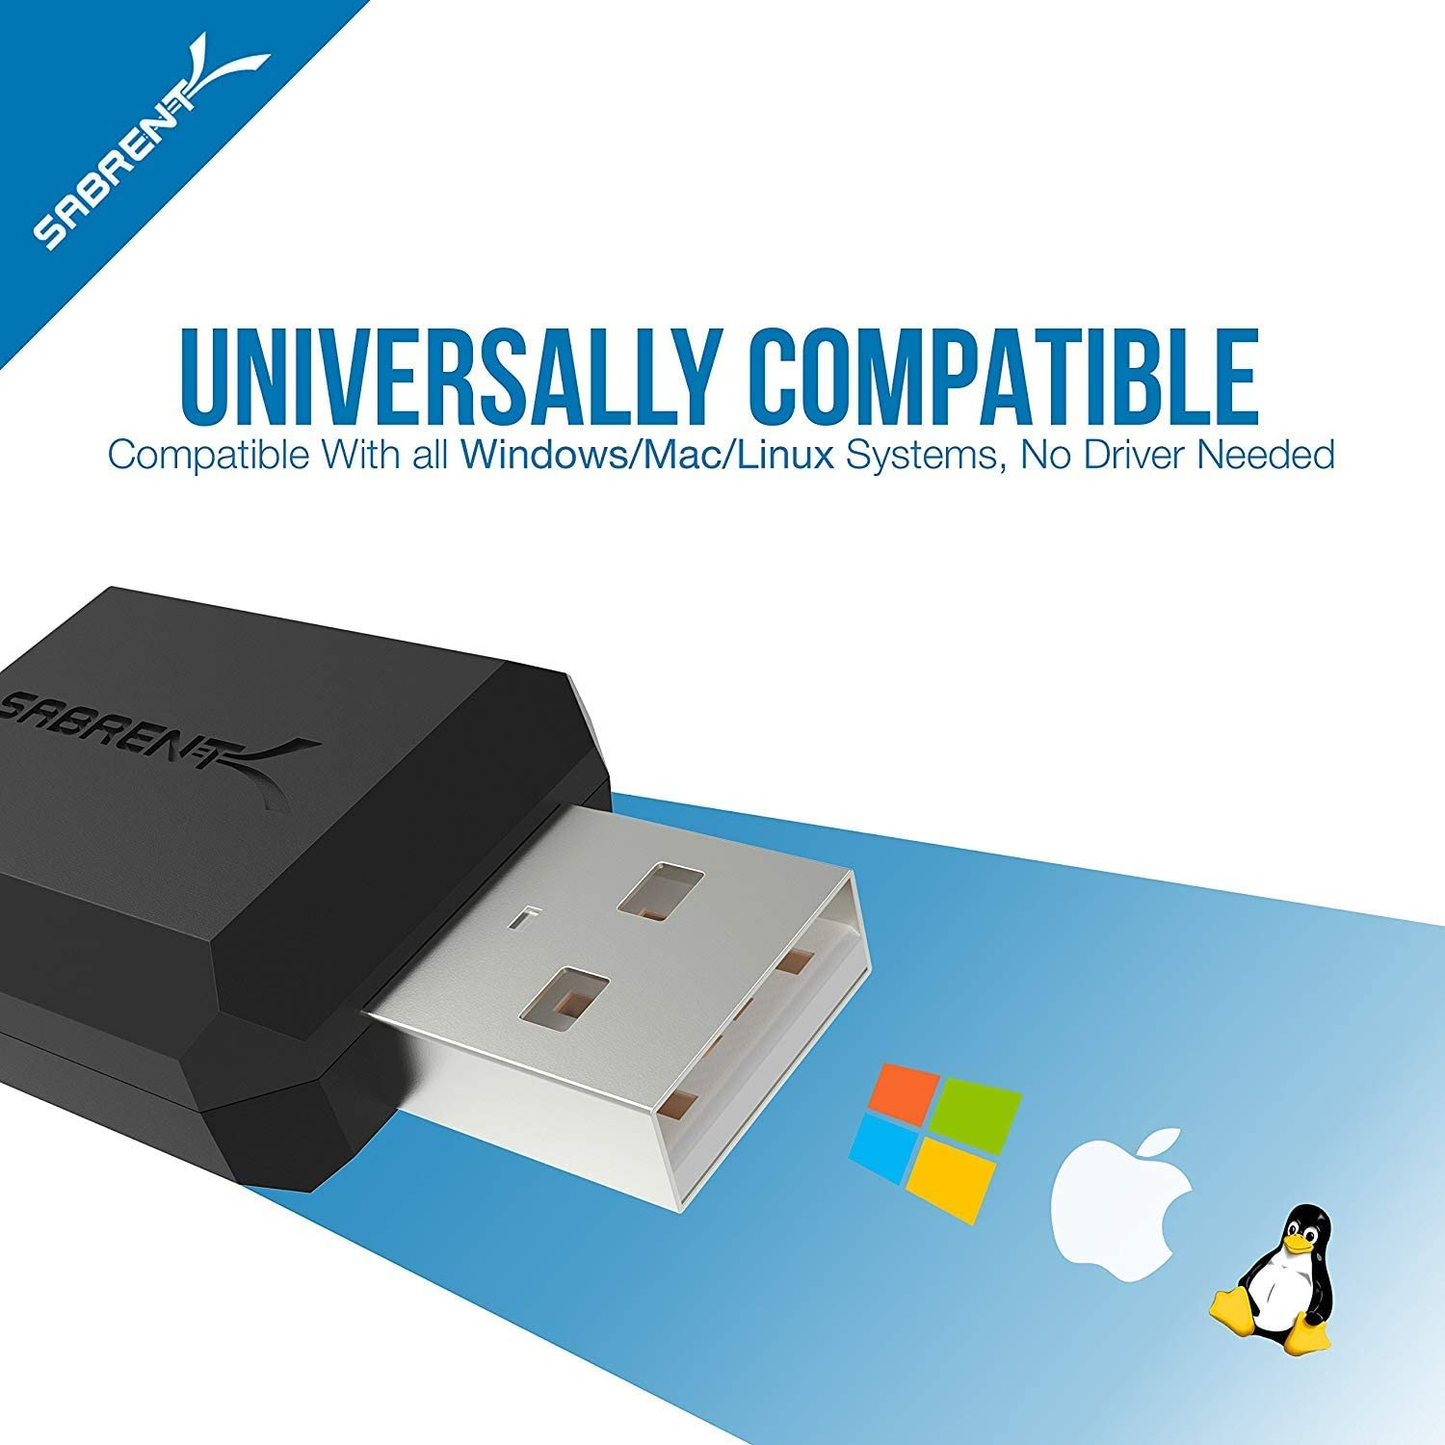 Sabrent USB External Stereo Sound Adapter for Windows and Mac. Plug and Play No Drivers Needed.